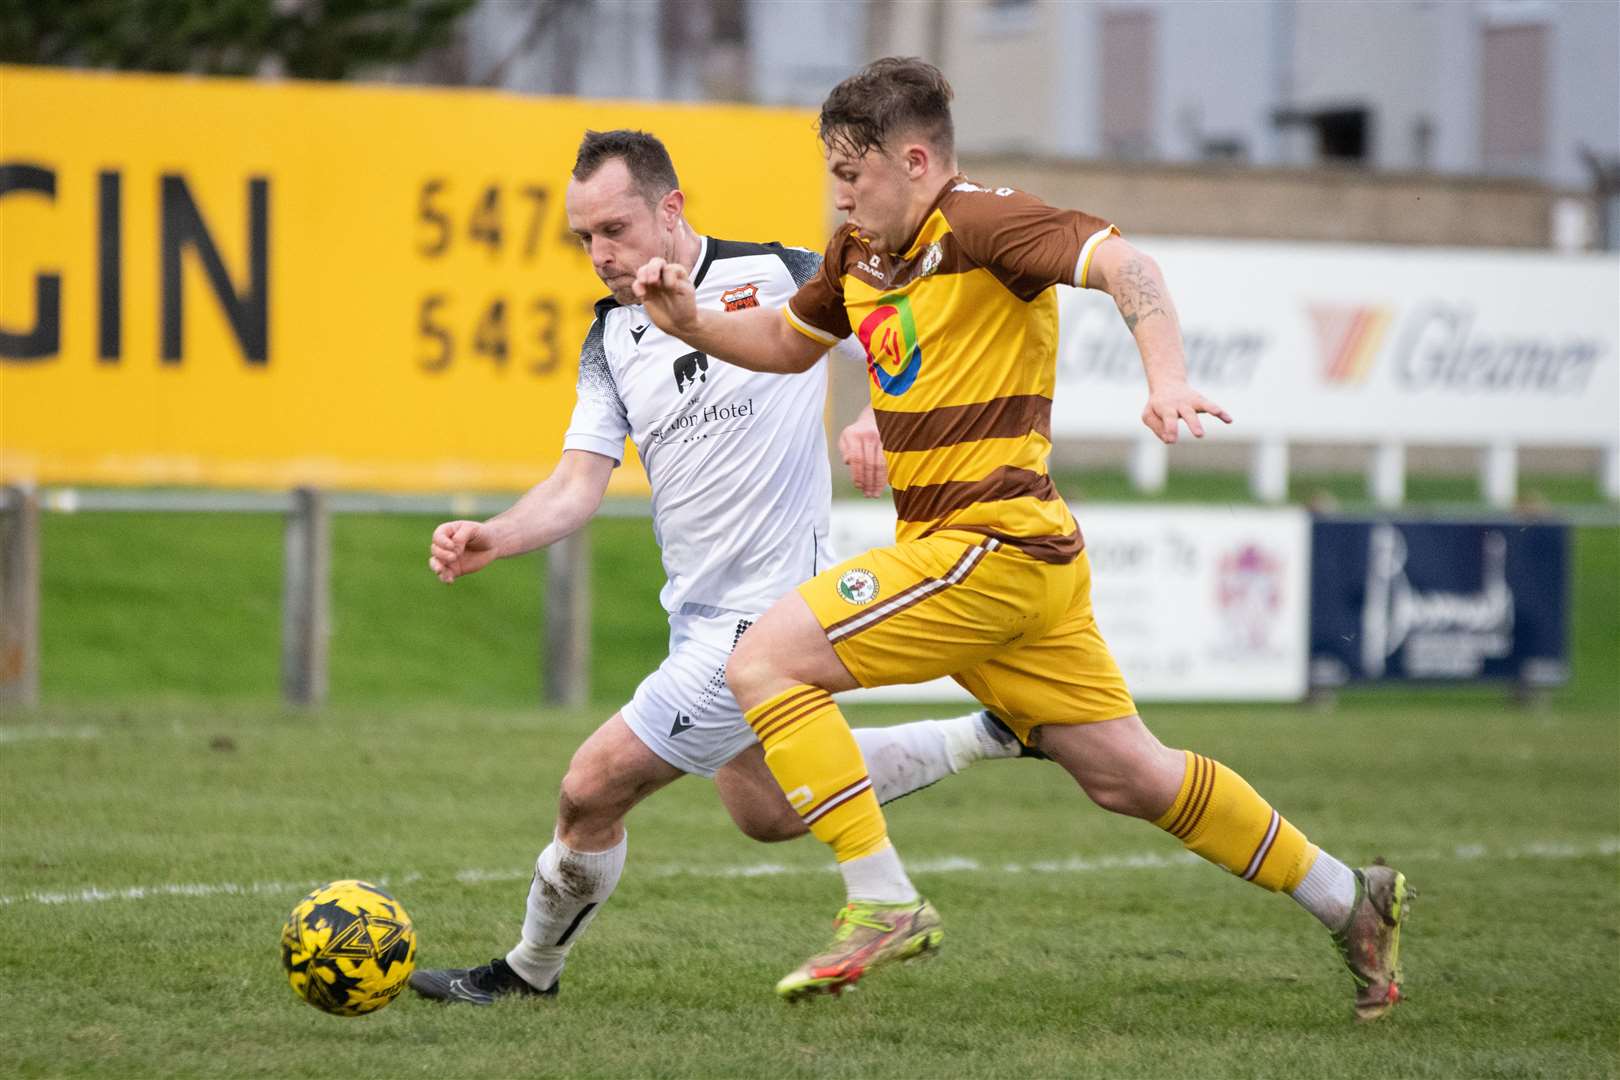 Forres forward Shaun Morrison charges in in a bid to win the ball from Rothes centre back Charlie MacDonald. ..Forres Mechanics FC (0) vs Rothes FC (1) - Highland Football League 23/24 - Mosset Park, Forres 25/11/2023...Picture: Daniel Forsyth..